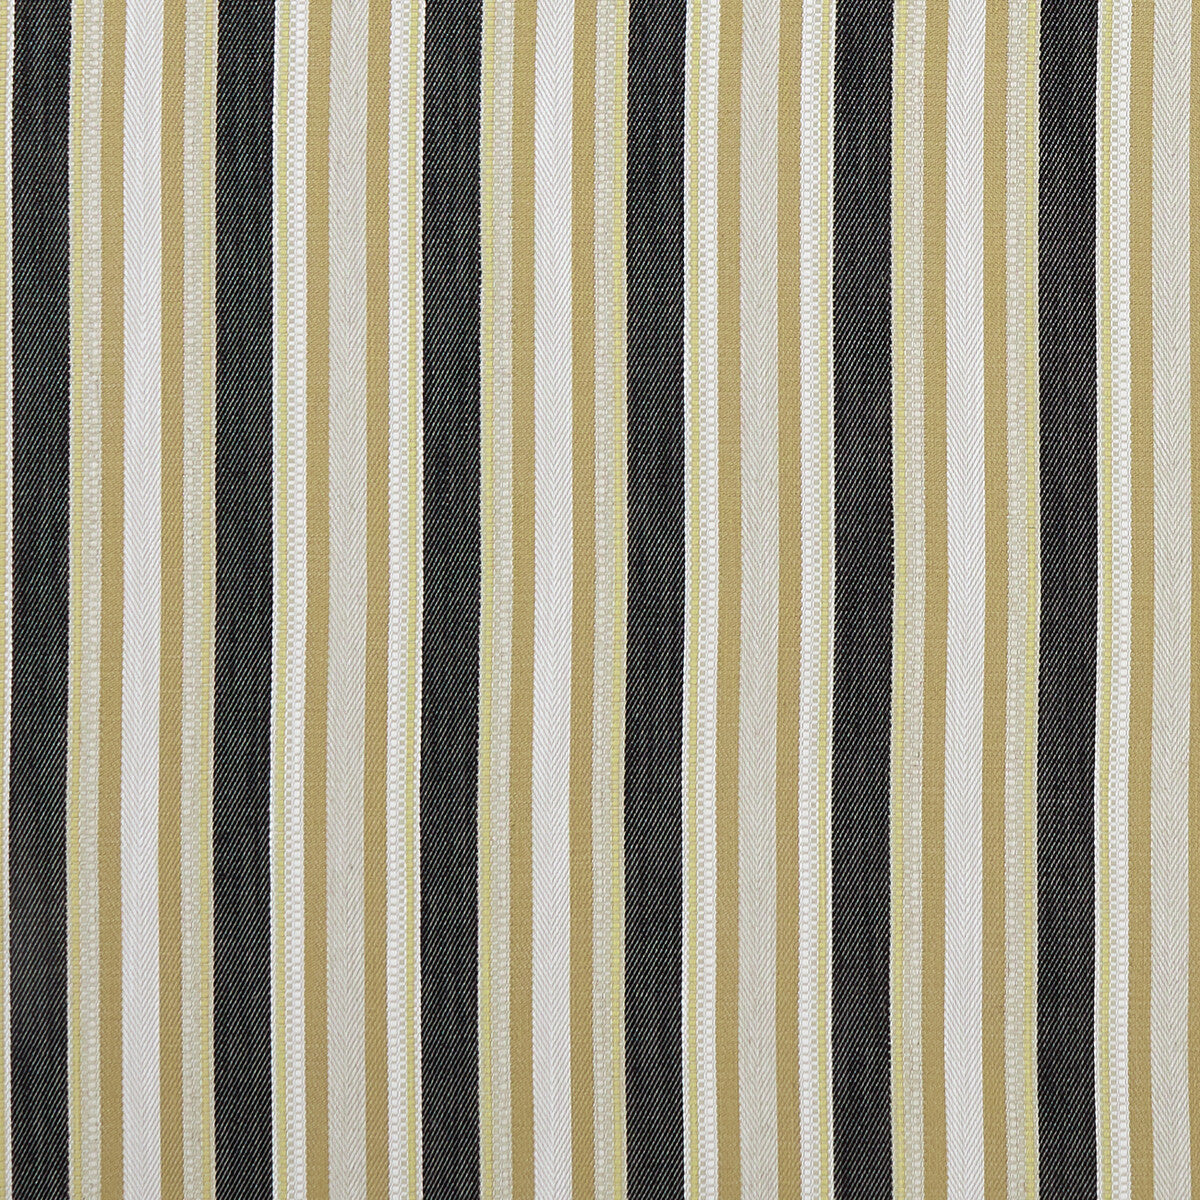 Ziba fabric in charcoal/ochre color - pattern F1352/02.CAC.0 - by Clarke And Clarke in the Clarke &amp; Clarke Prince Of Persia collection